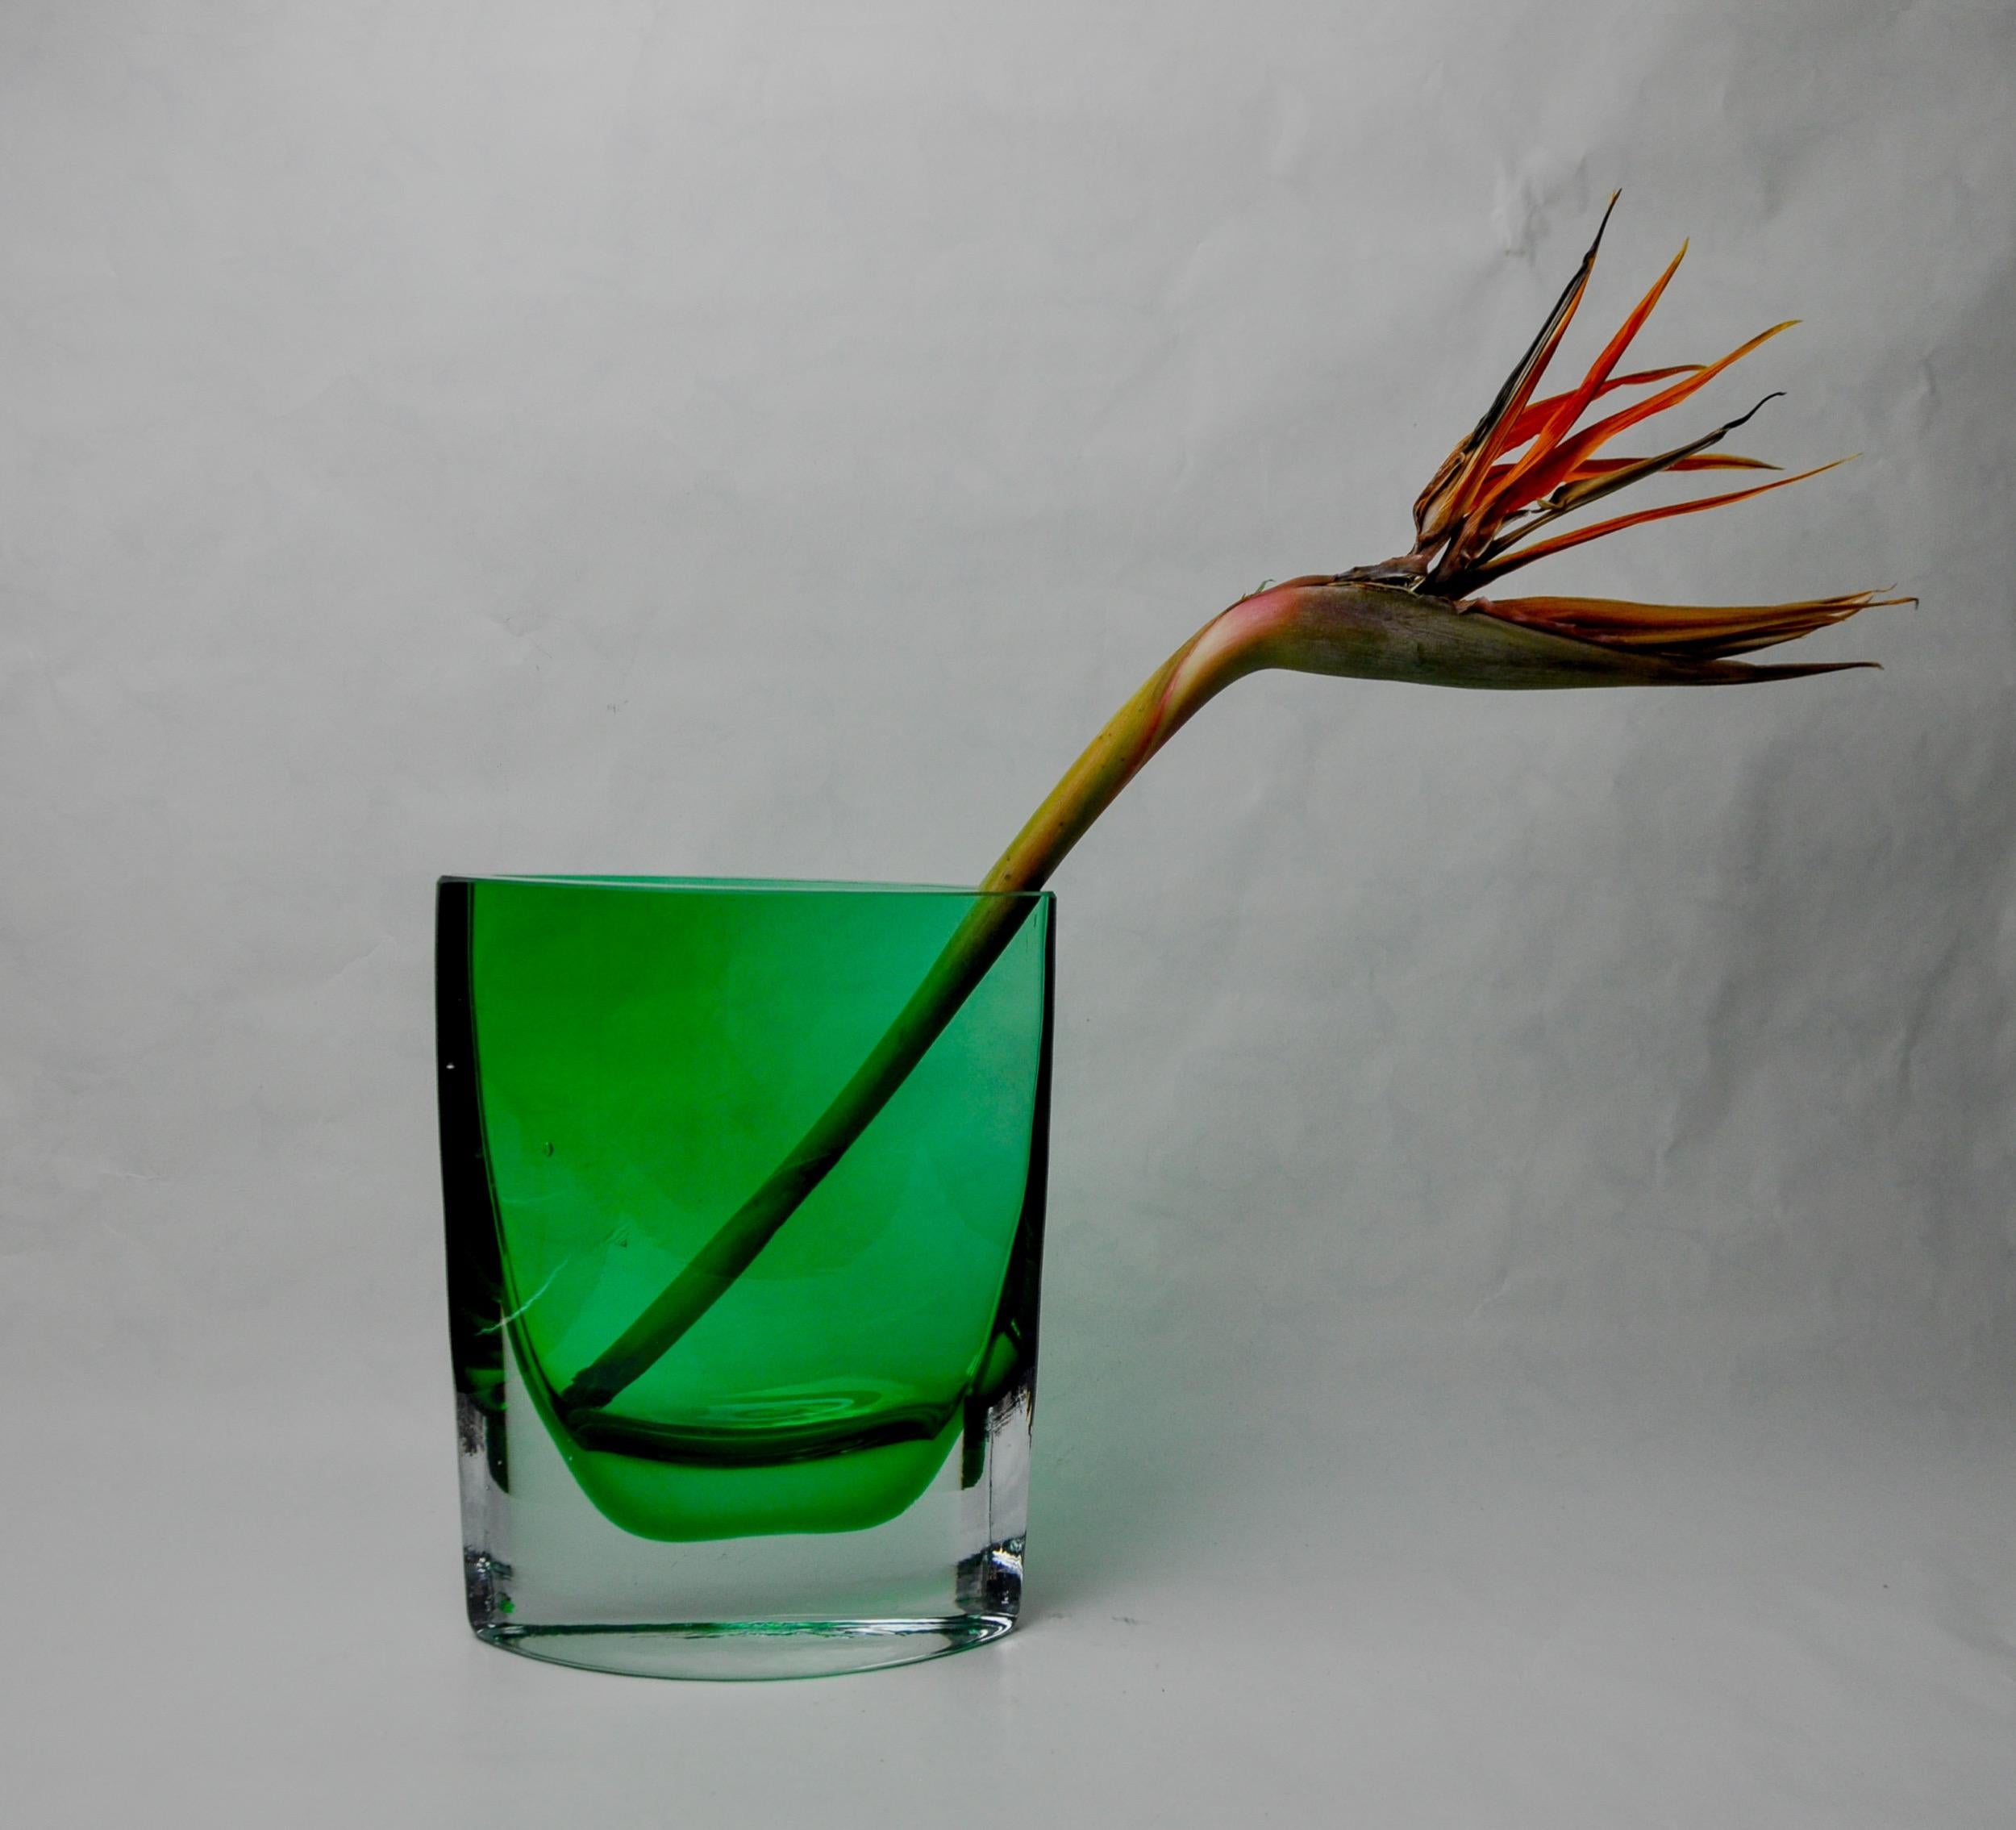 Superb green Sommerso vase designed and produced by Seguso in Italy in the 1980s. Murano glass vase handcrafted by Venetian master glassmakers using the Sommerso technique (superposition of layers of molten glass). Decorative object that will bring